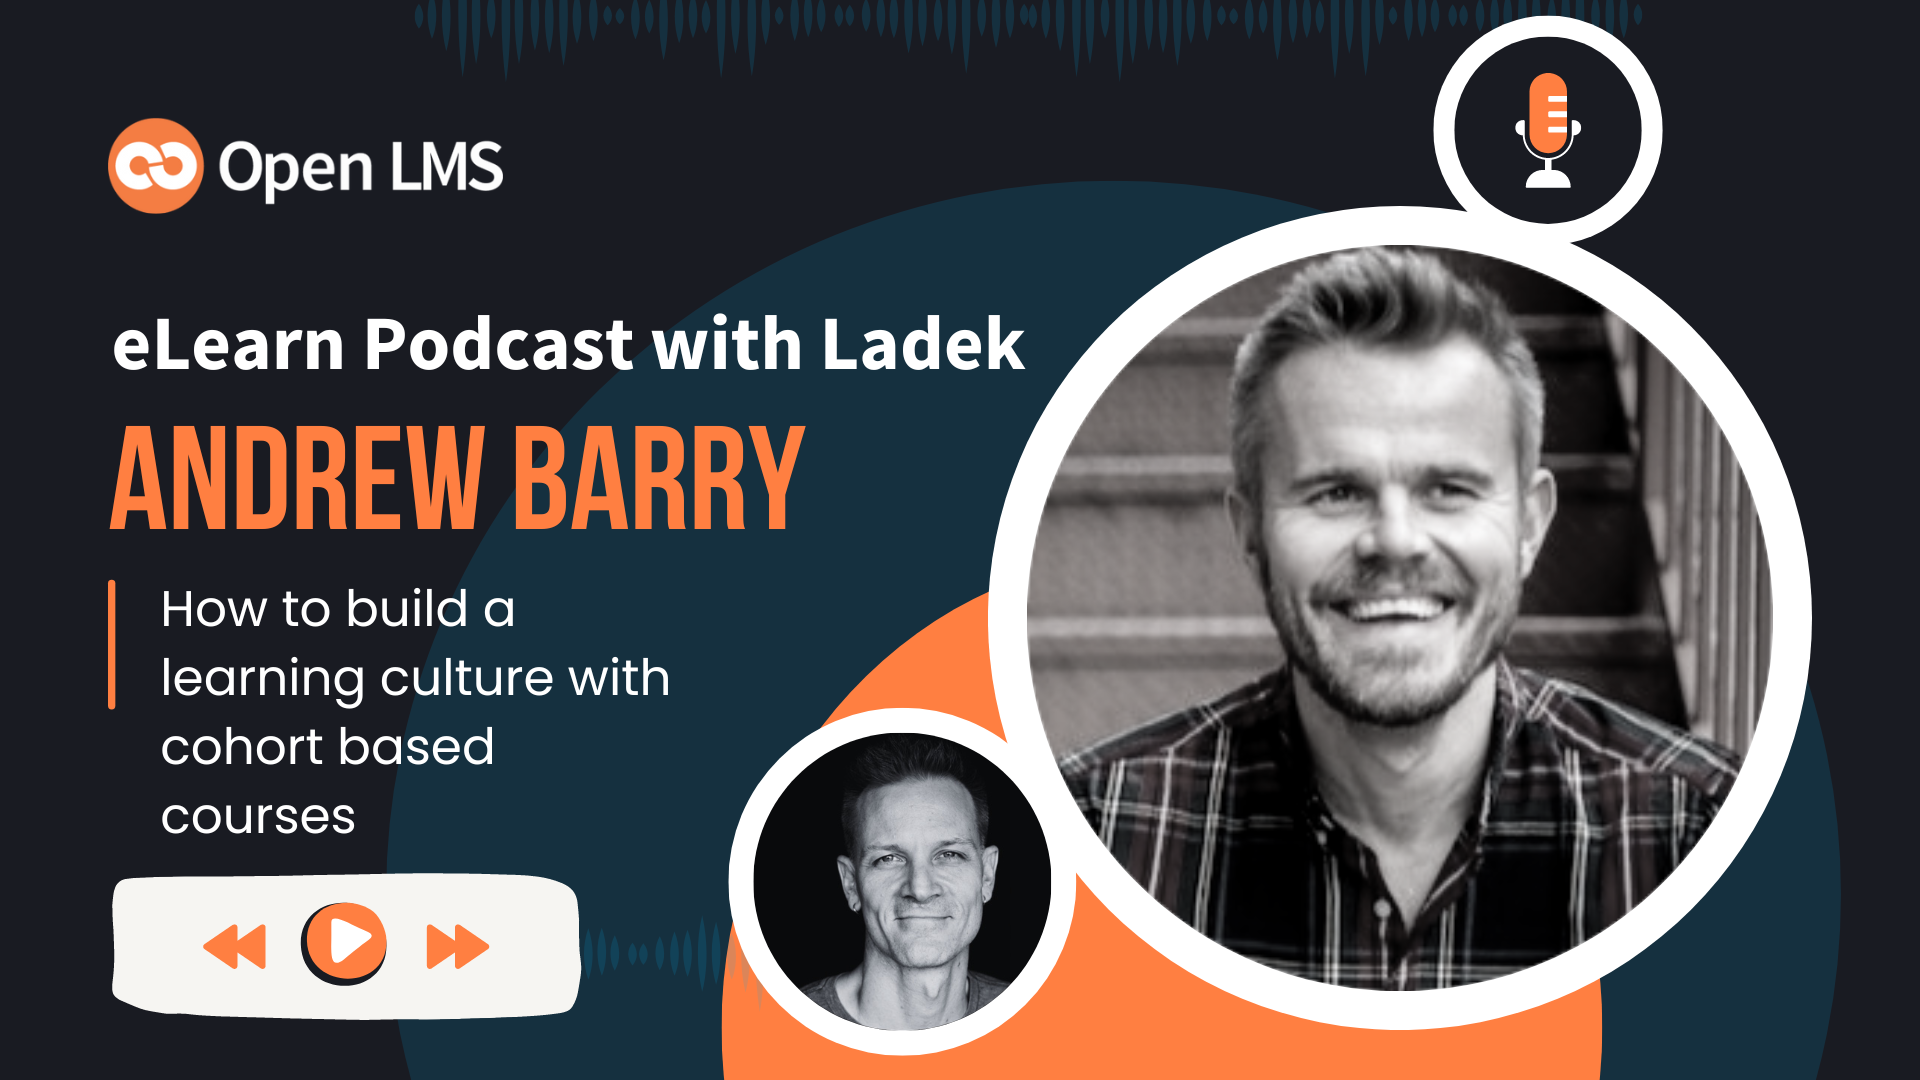 How To Build A Learning Culture Through Cohort-Based Courses With Andrew Barry